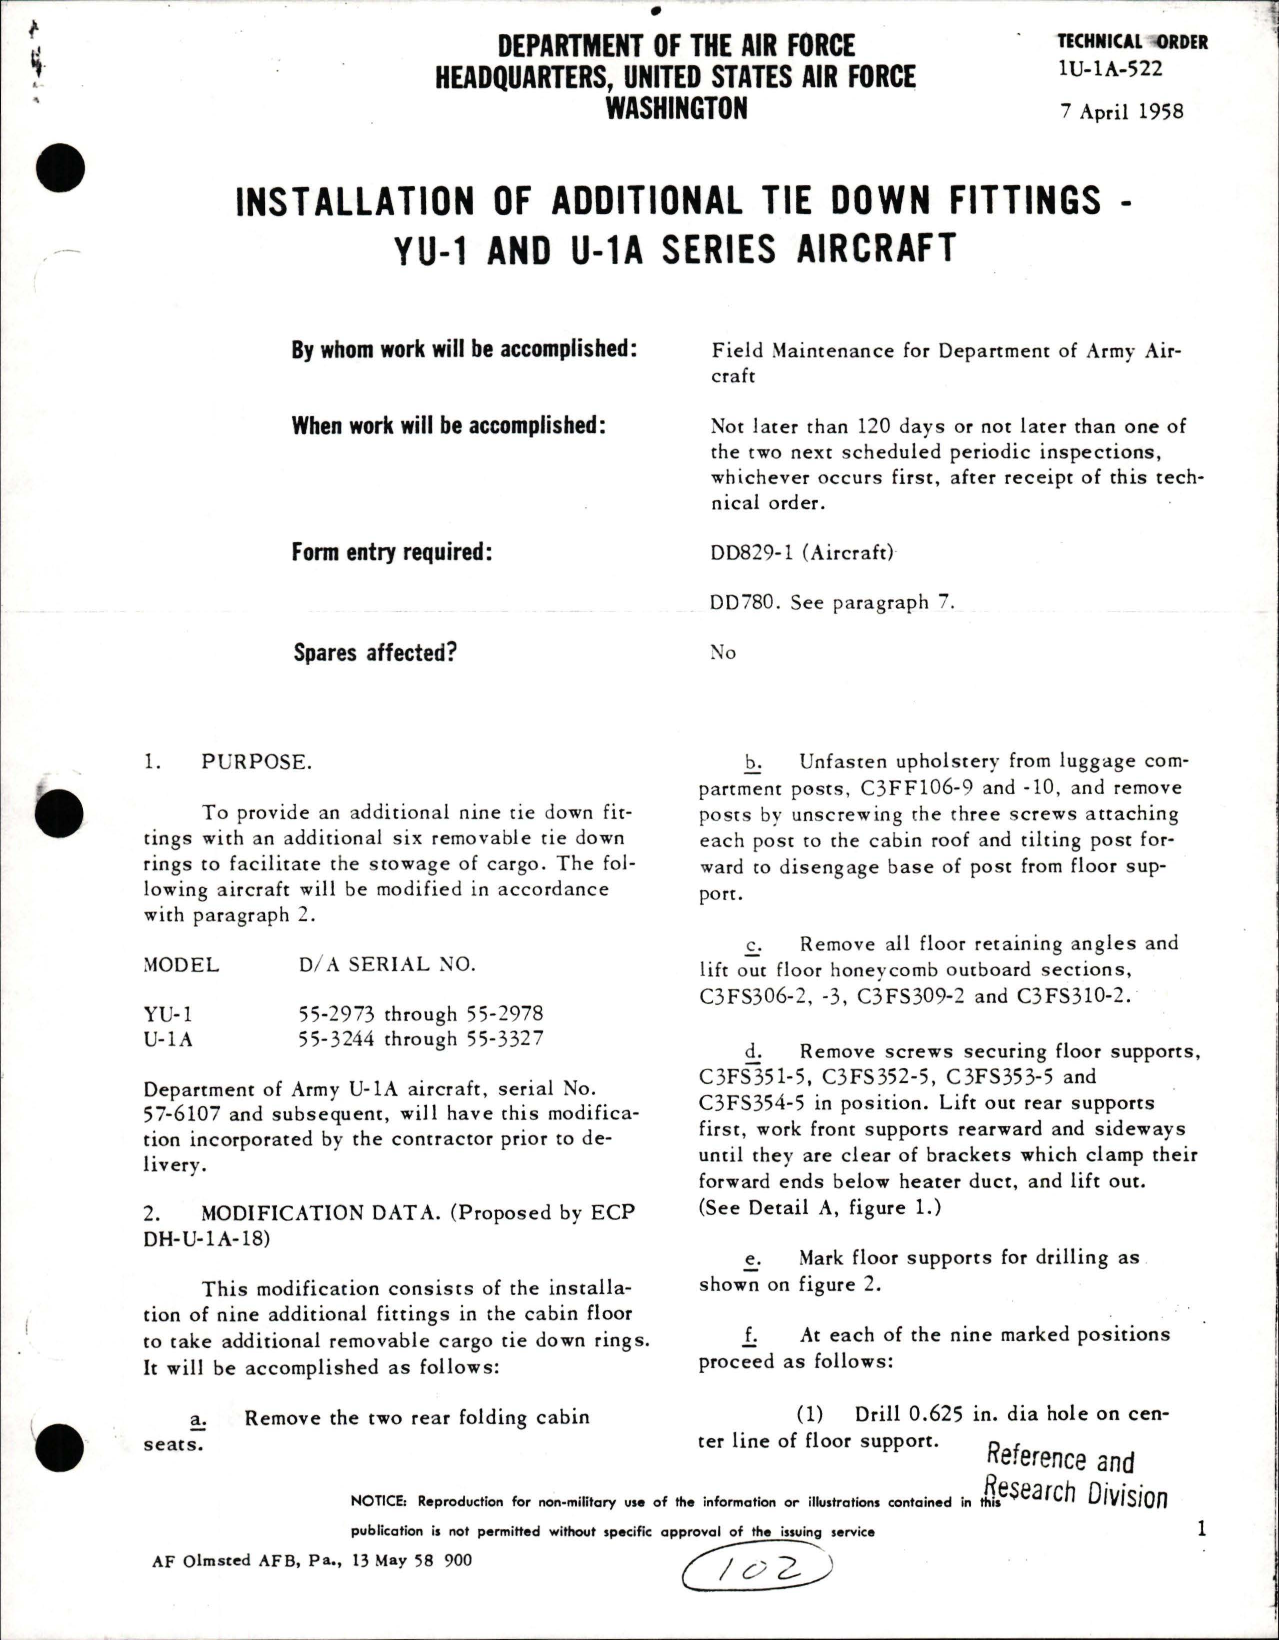 Sample page 1 from AirCorps Library document: Installation of Additional Tie Down Fittings for YU-1 and U-1A